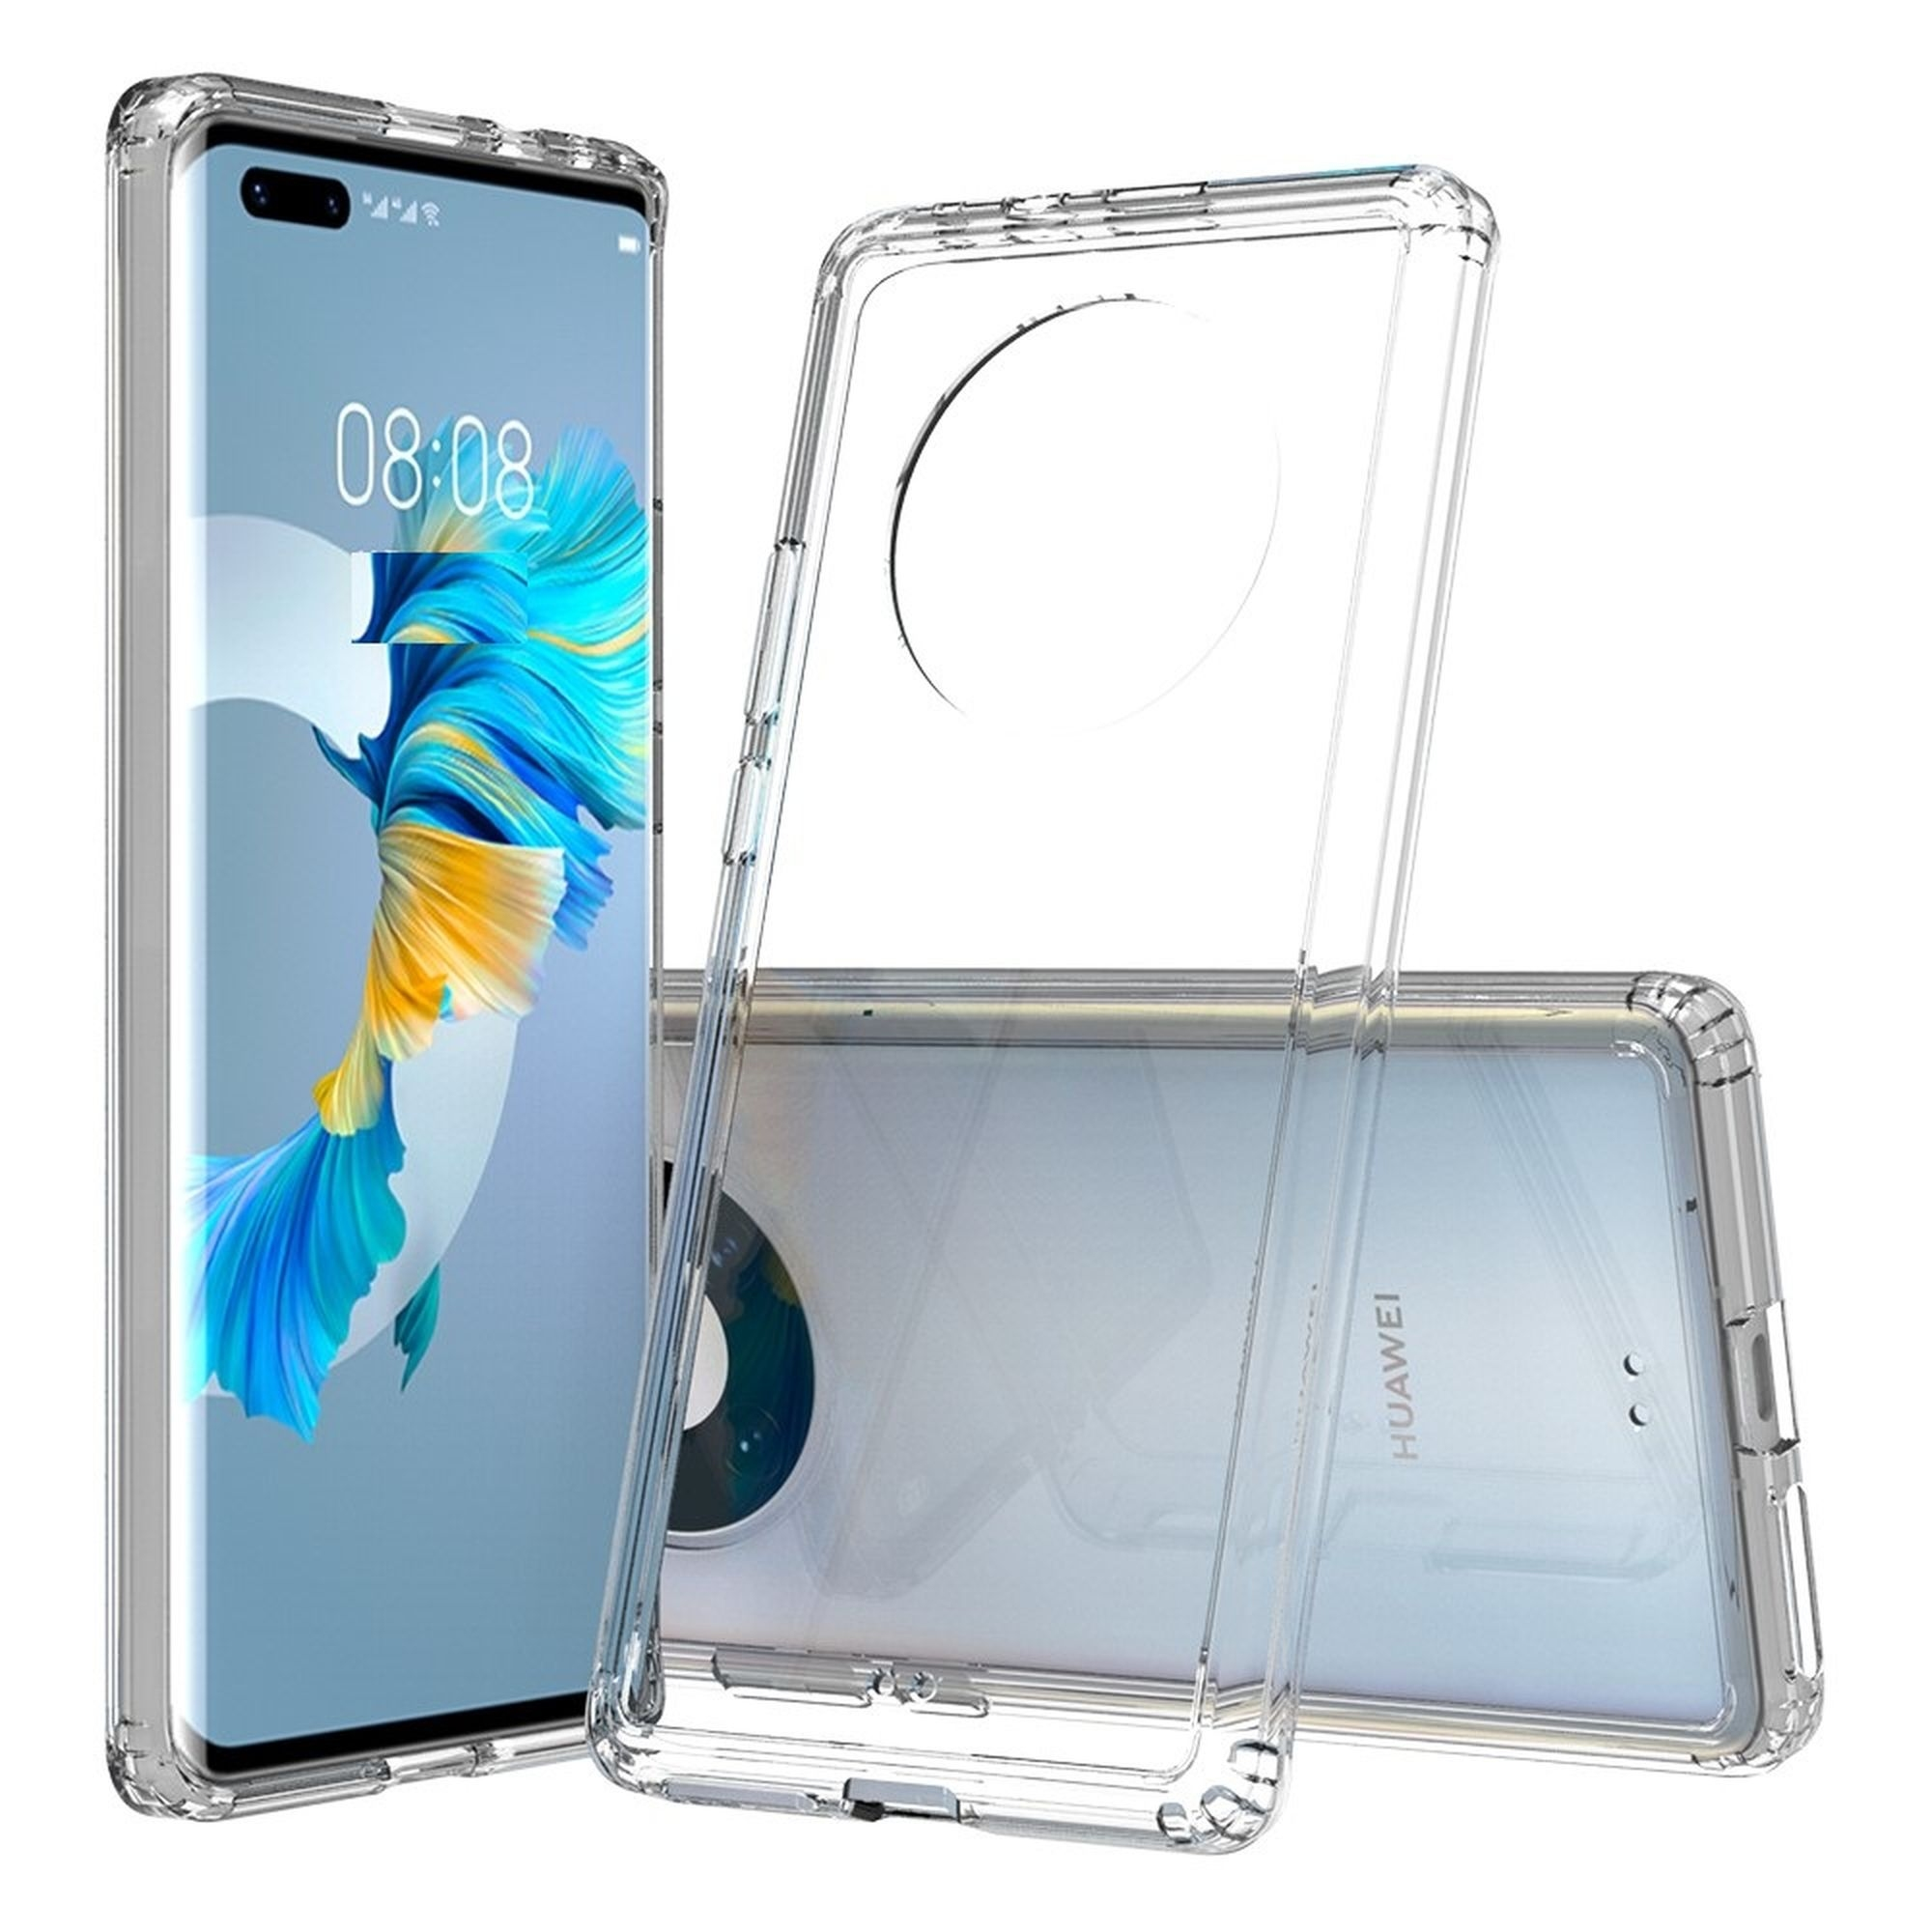 JT Backcover, Huawei, Mate Clear, Pankow BERLIN 40 transparent Pro,